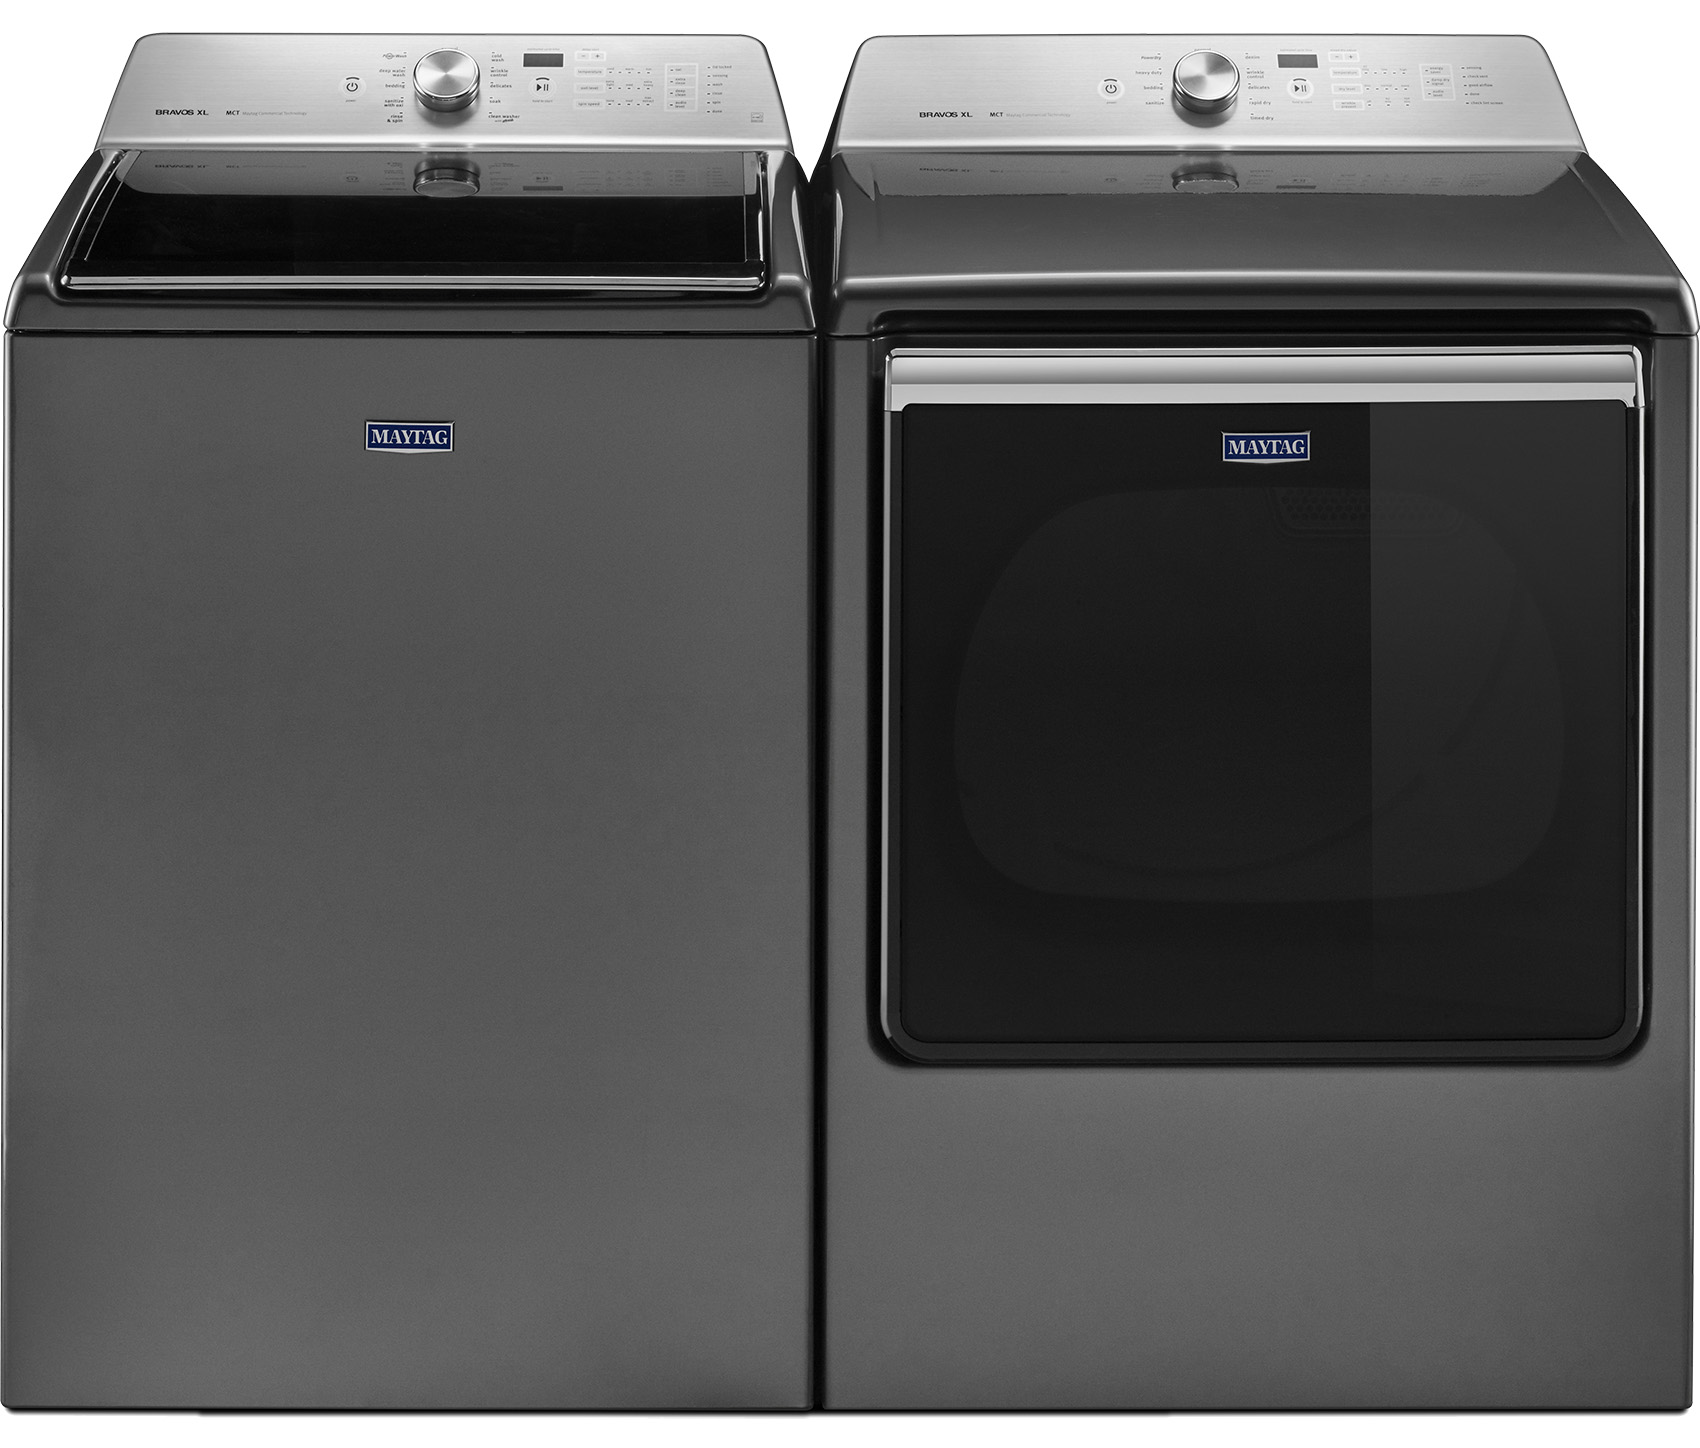 how to reset Maytag dryer 3.0